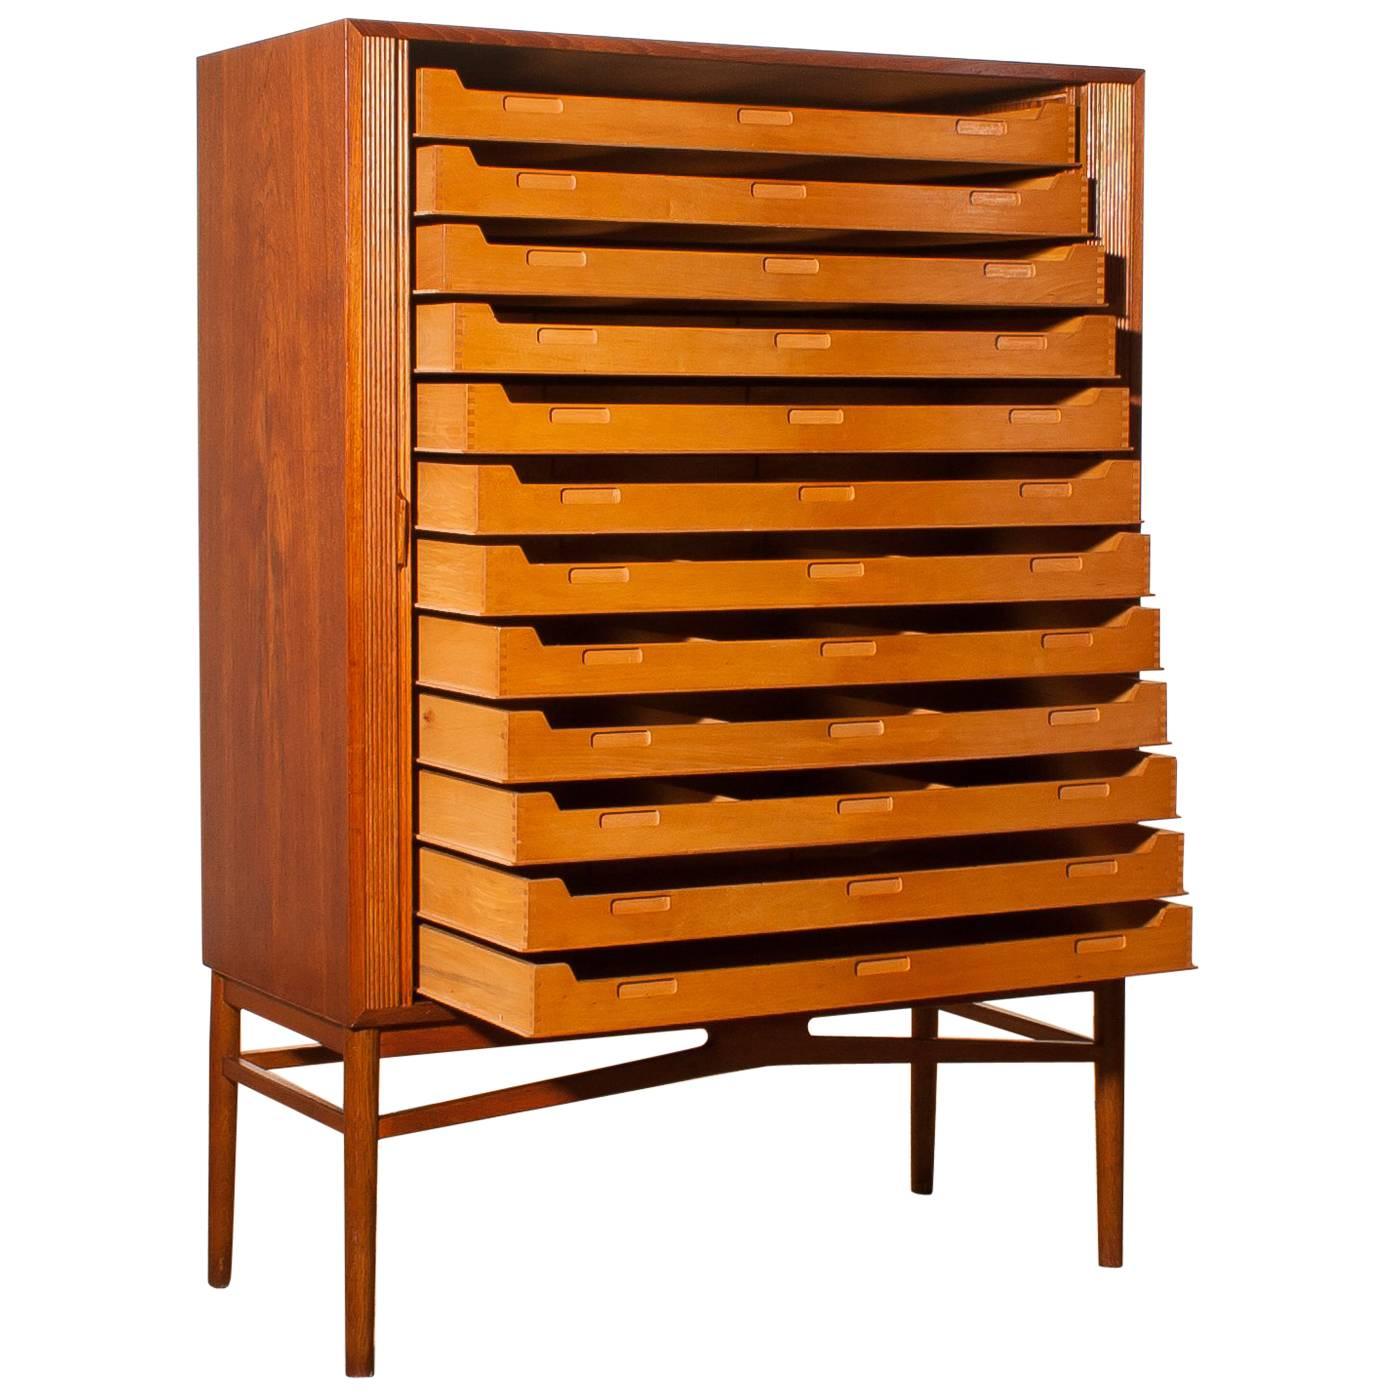 1950s, Teak Tambour Archive Cabinet by Carl-Axel Acking